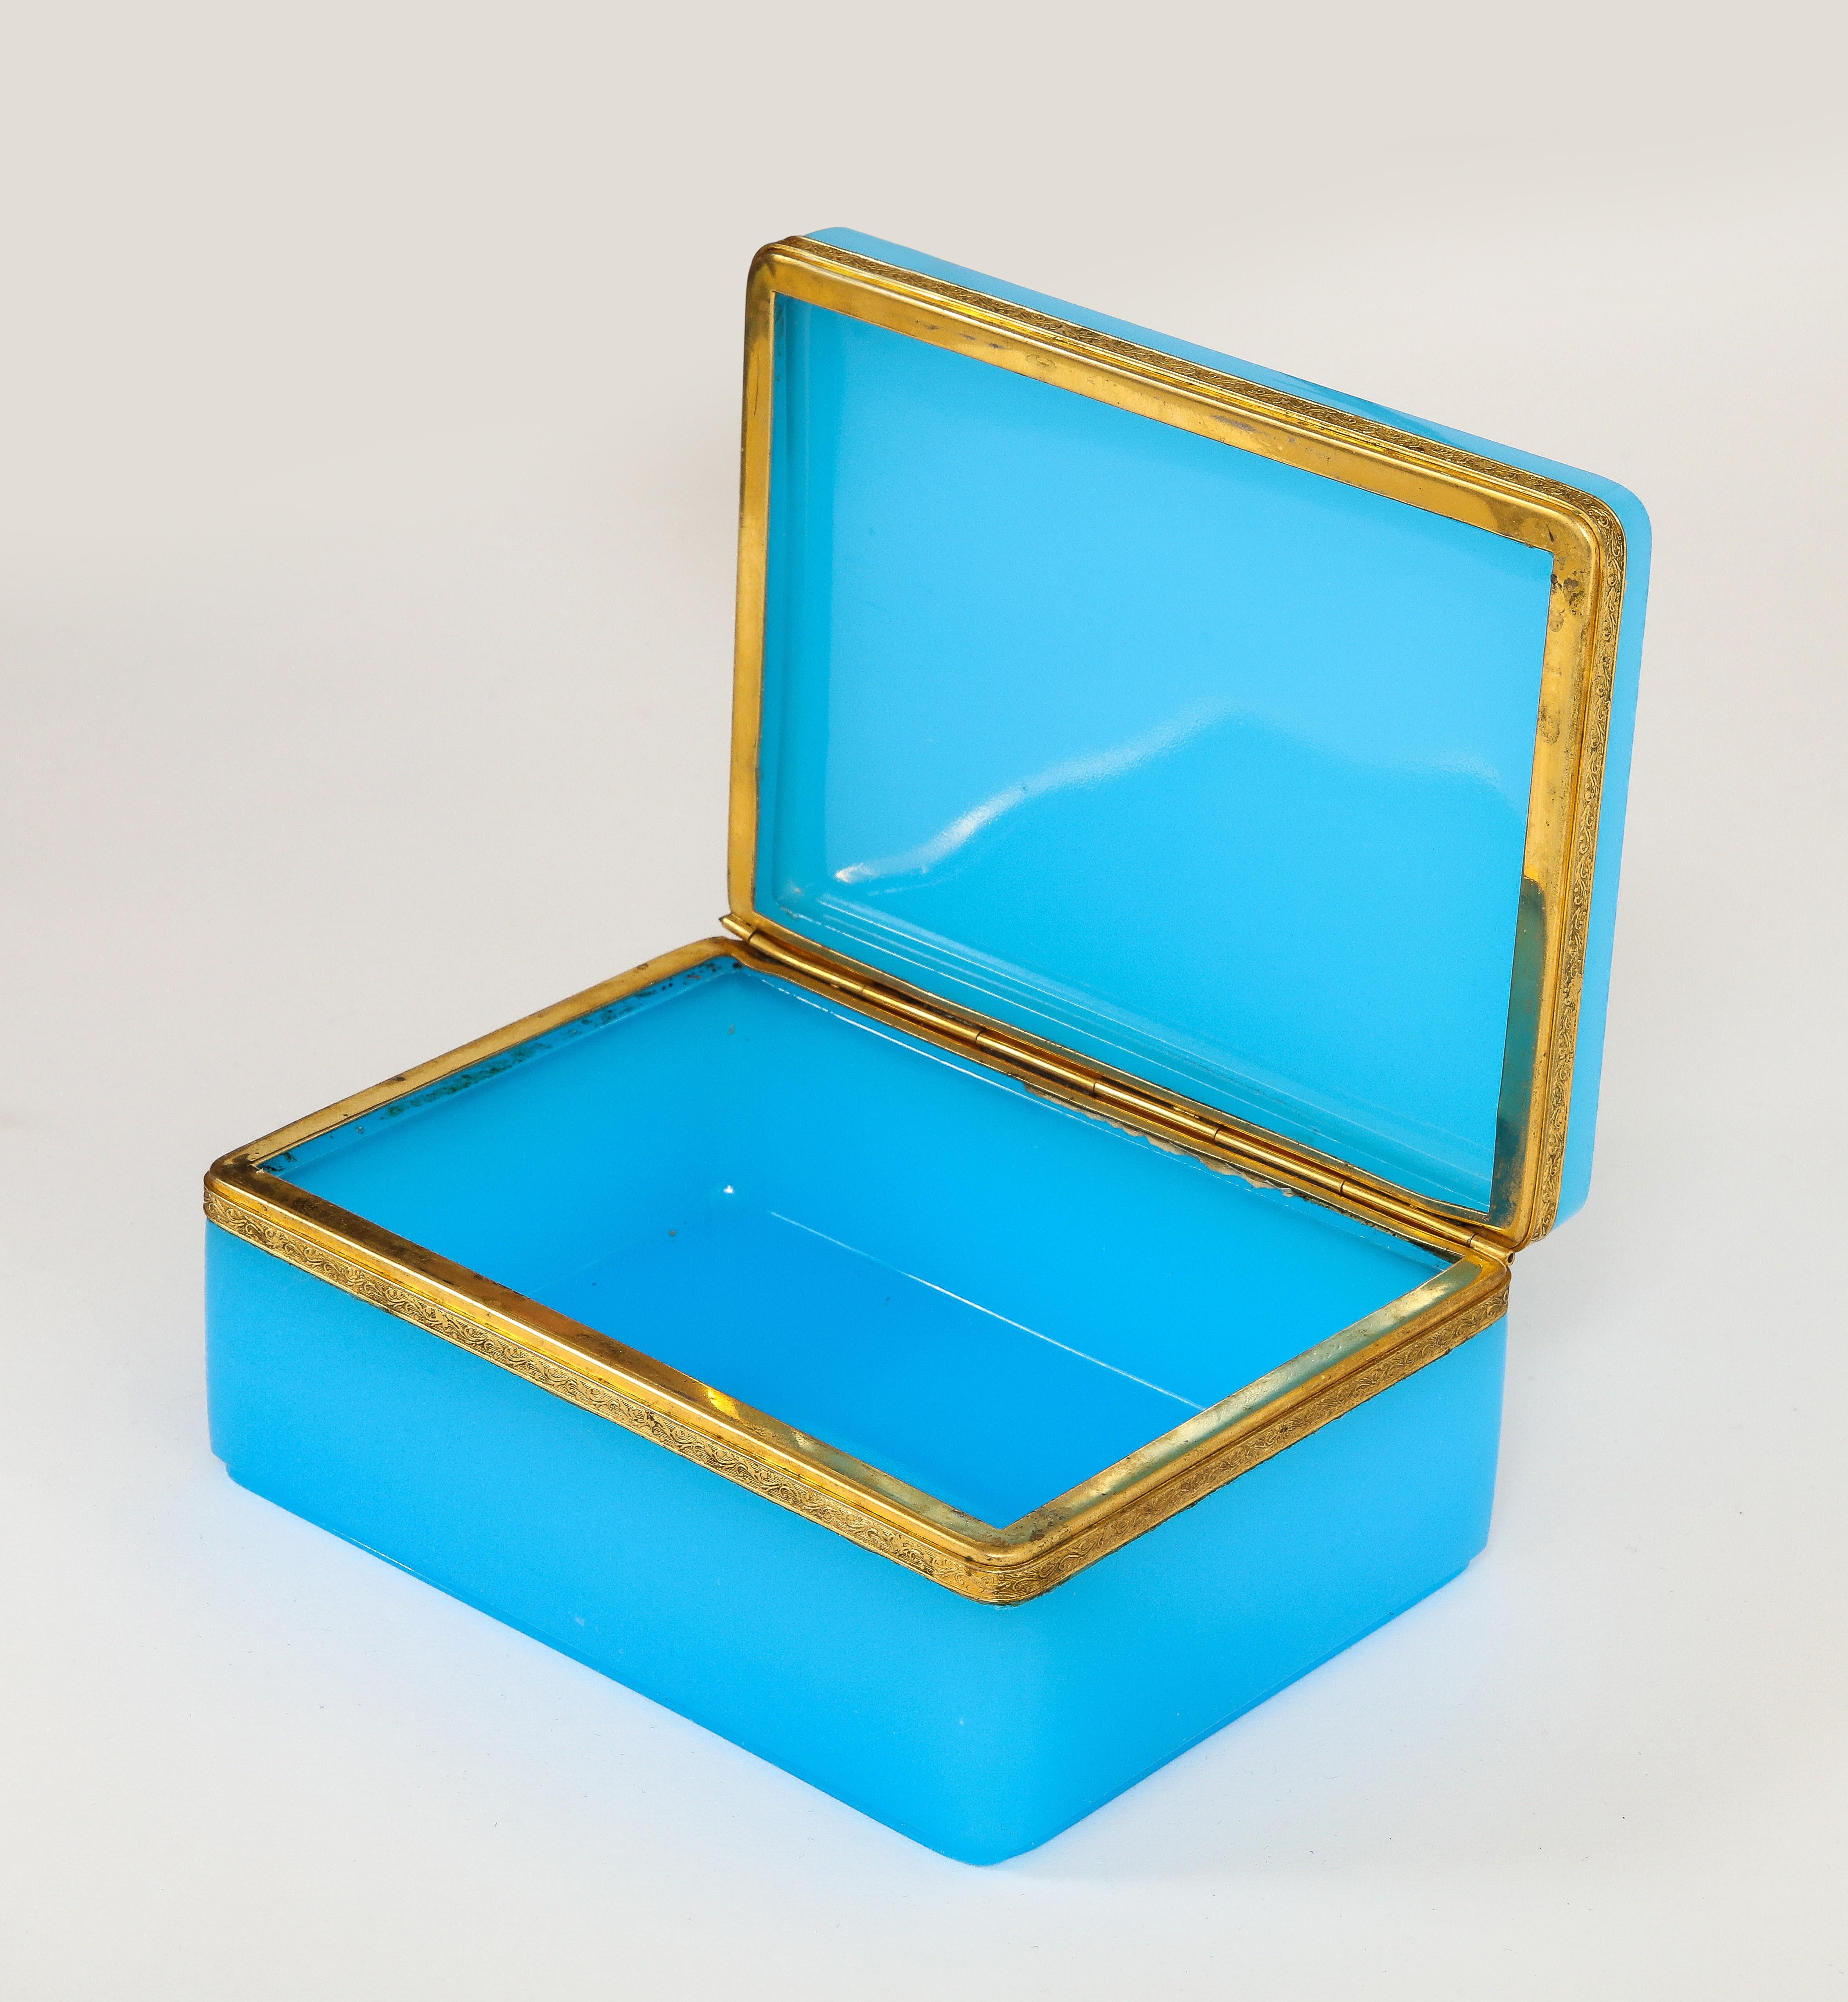 Gilt Fantastic 19th Century French Dore Bronze Mounted Blue Opaline Crystal Box For Sale